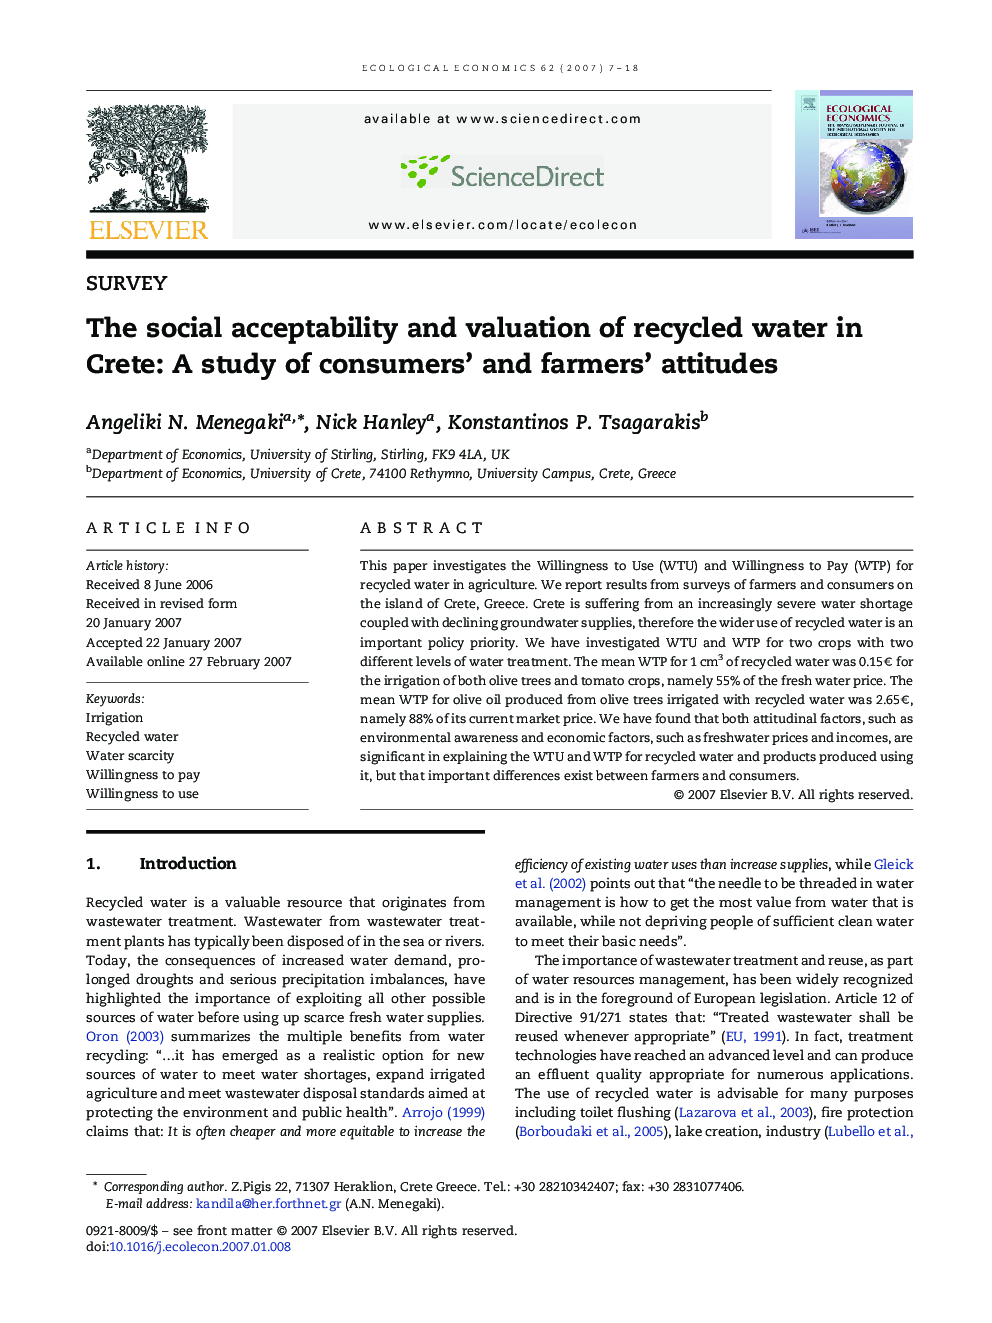 The social acceptability and valuation of recycled water in Crete: A study of consumers' and farmers' attitudes